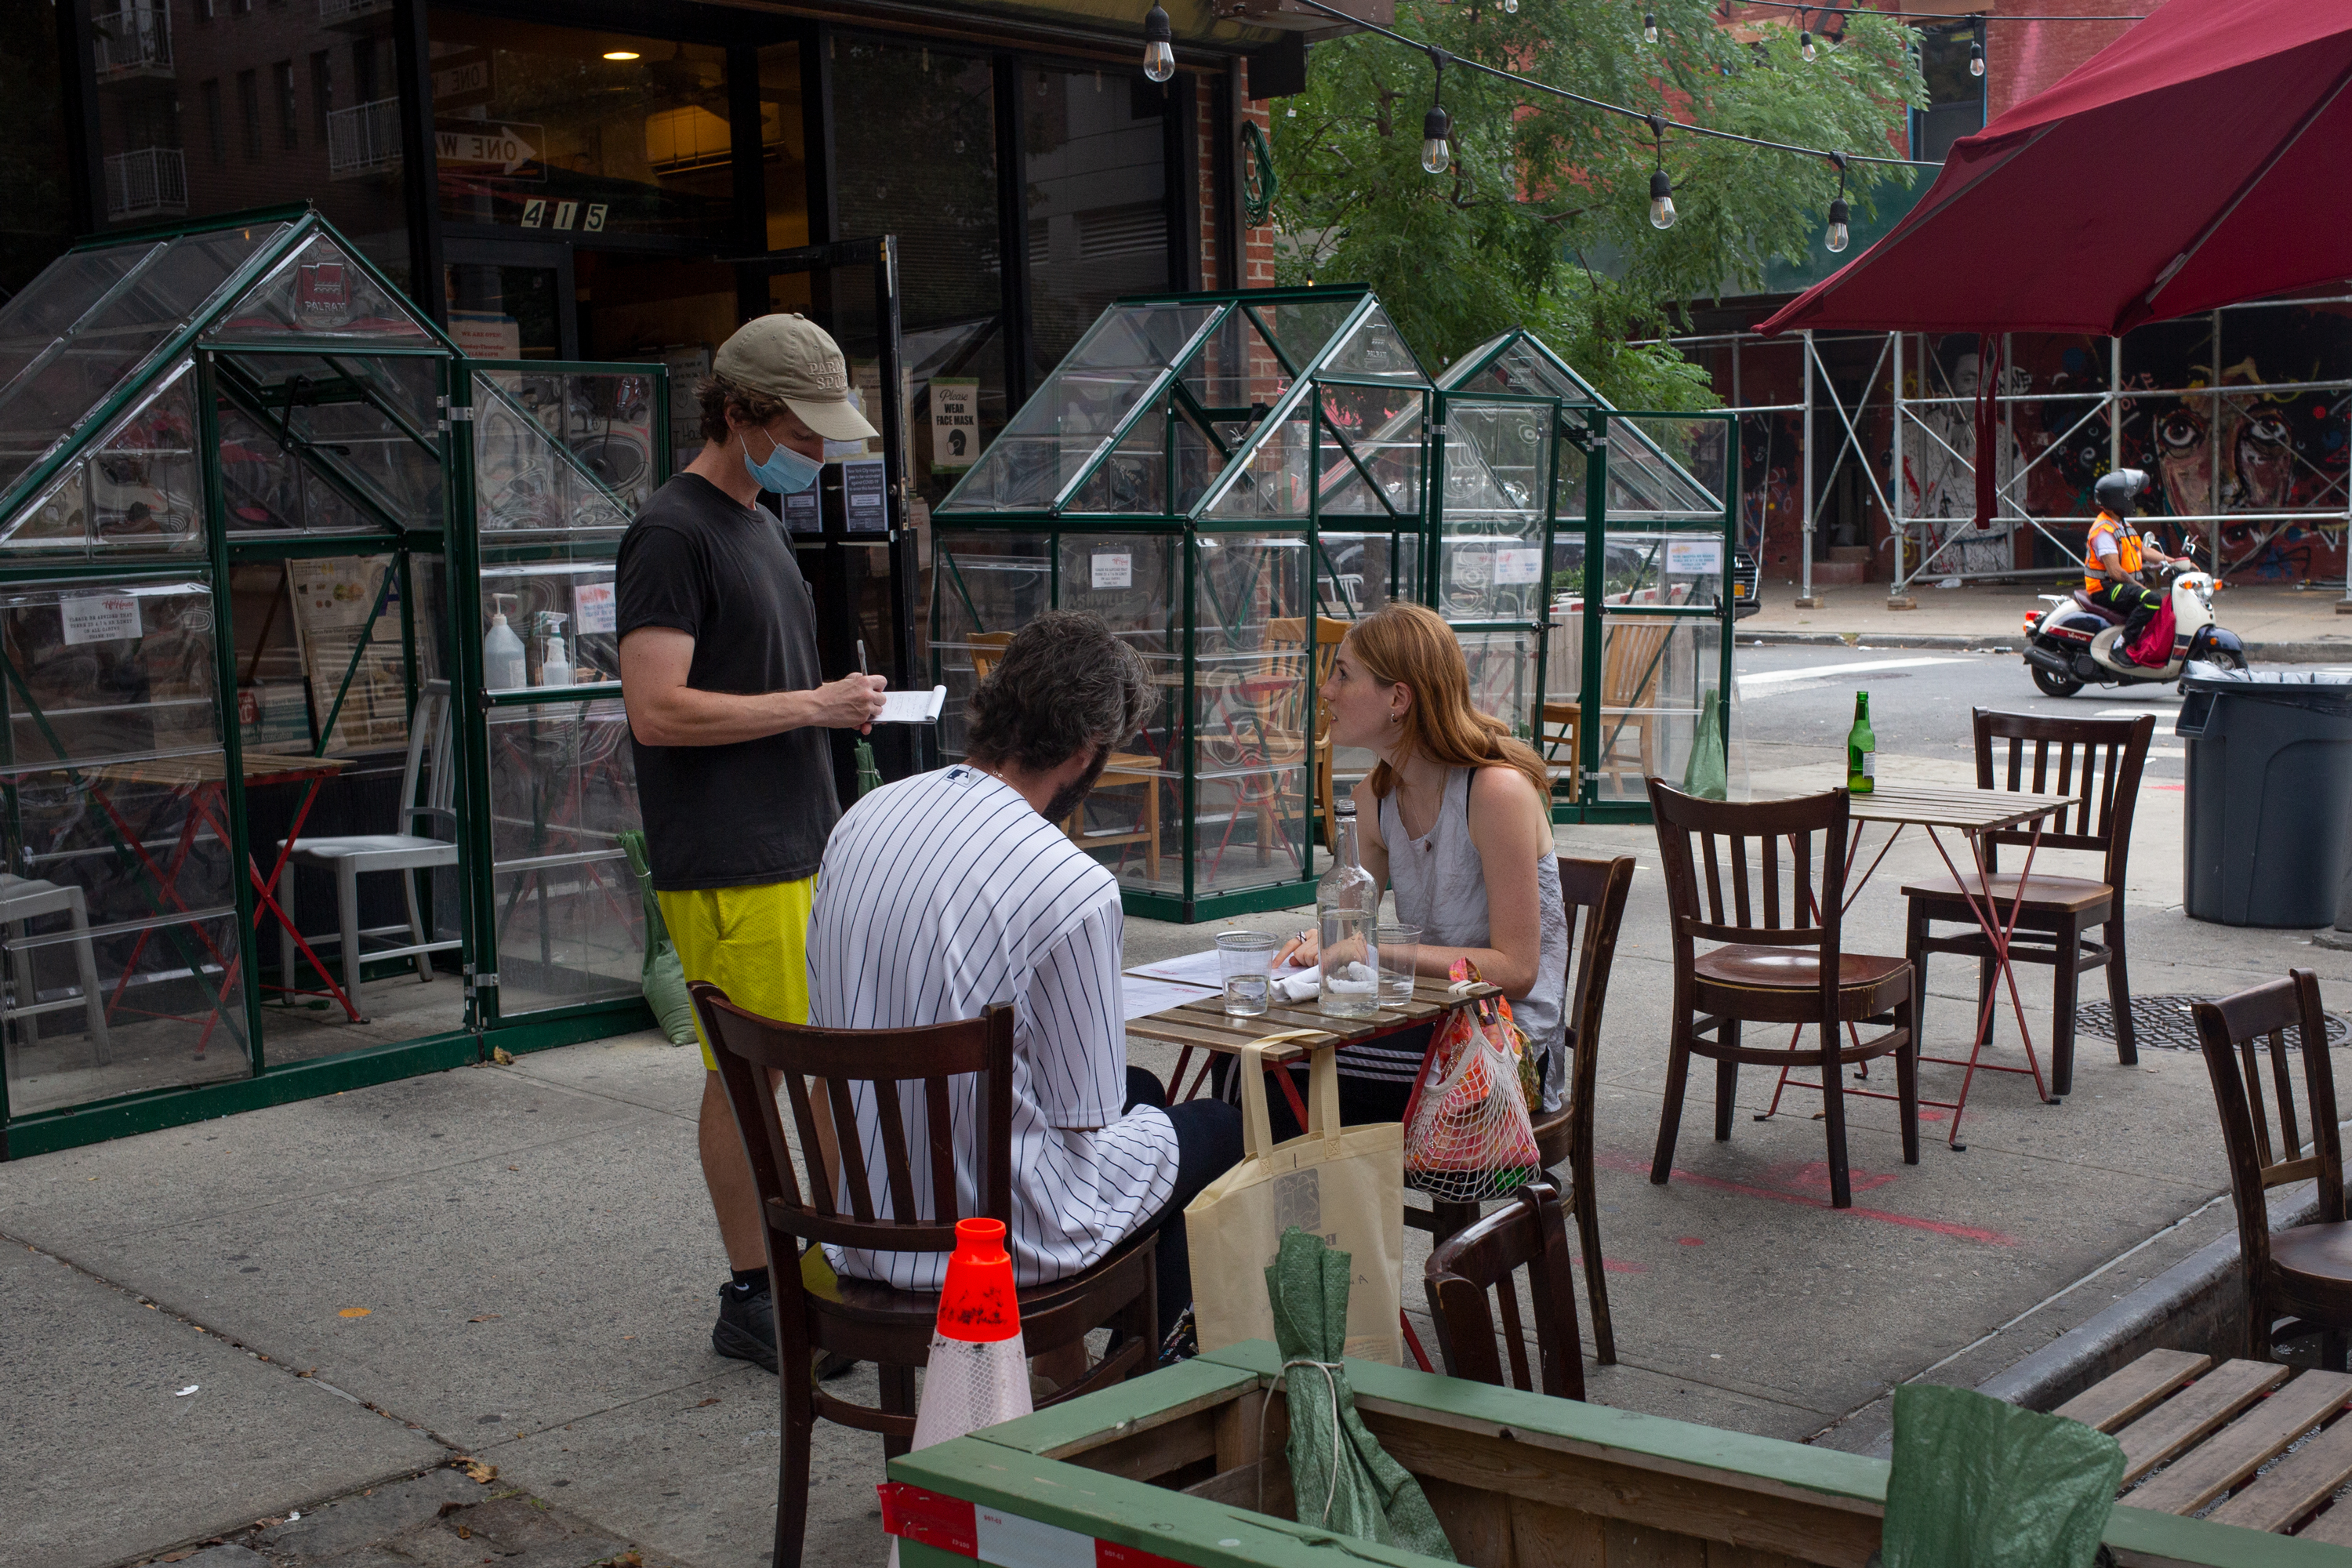 A waiter takes a couple’s order at Peaches HotHouse in Bed-Stuy, Brooklyn, Sept. 16, 2021.